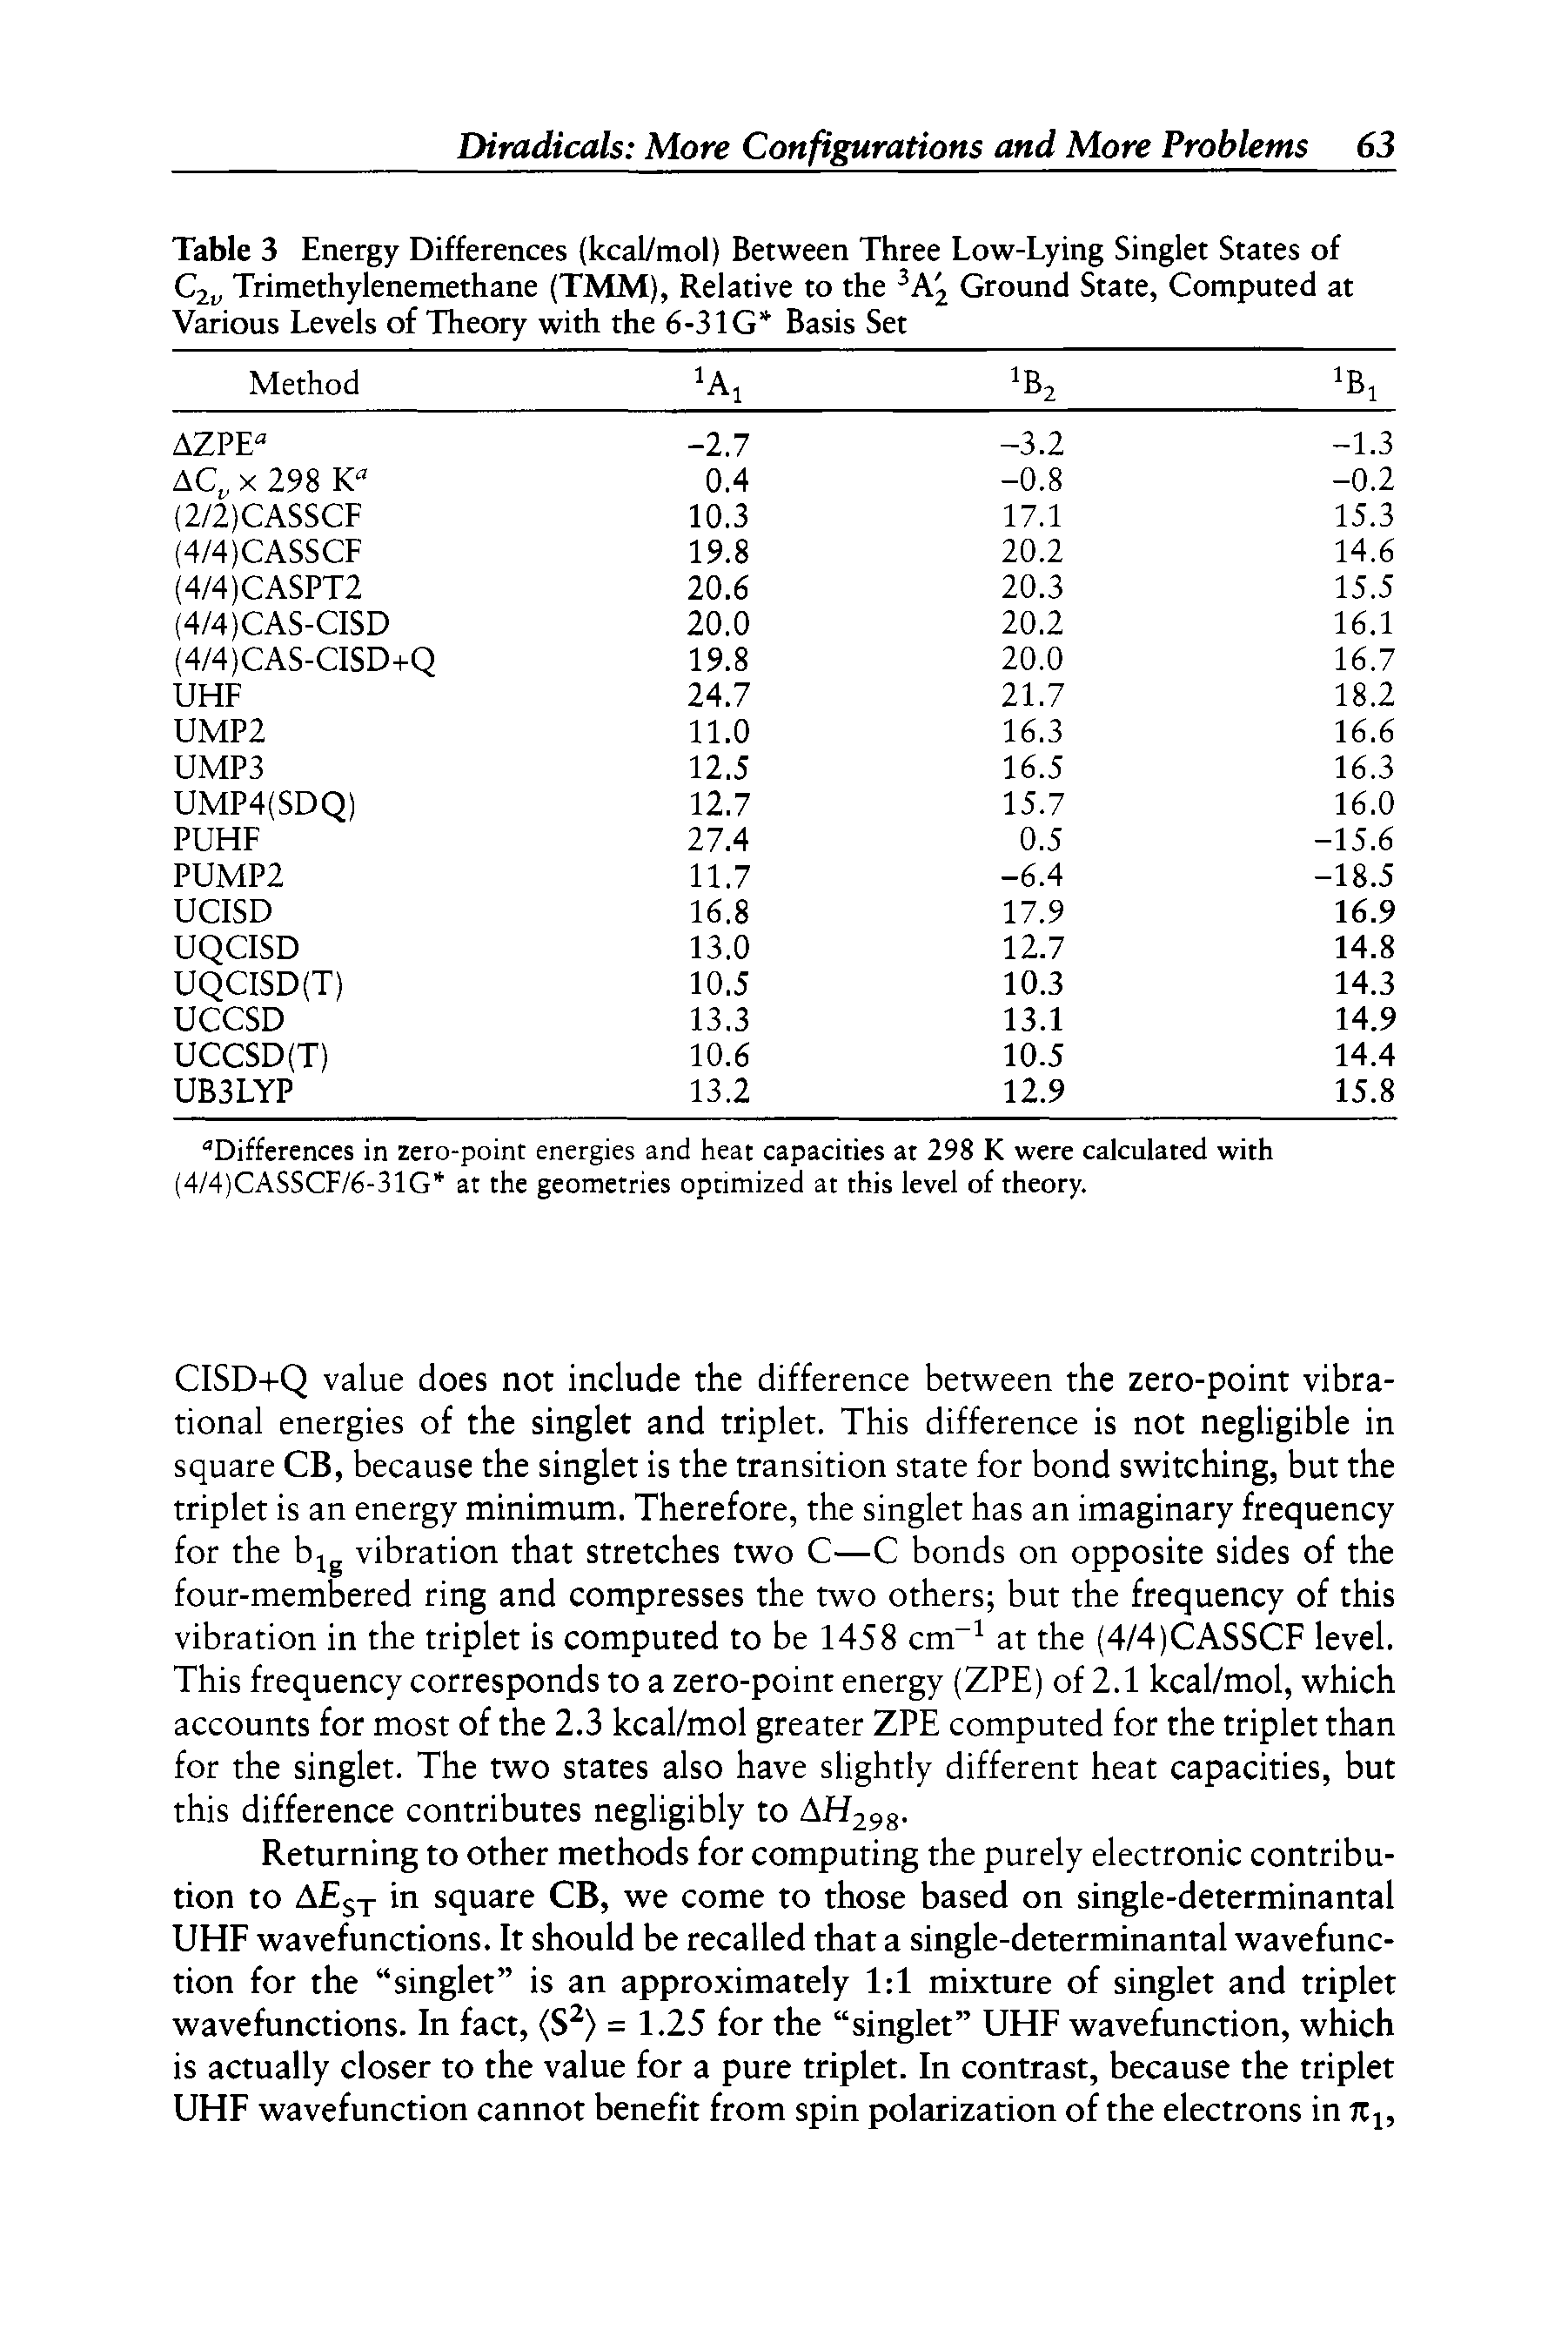 Table 3 Energy Differences (kcal/mol) Between Three Low-Lying Singlet States of C2 Trimethylenemethane (TMM), Relative to the Ground State, Computed at Various Levels of Theory with the 6-3IG Basis Set...